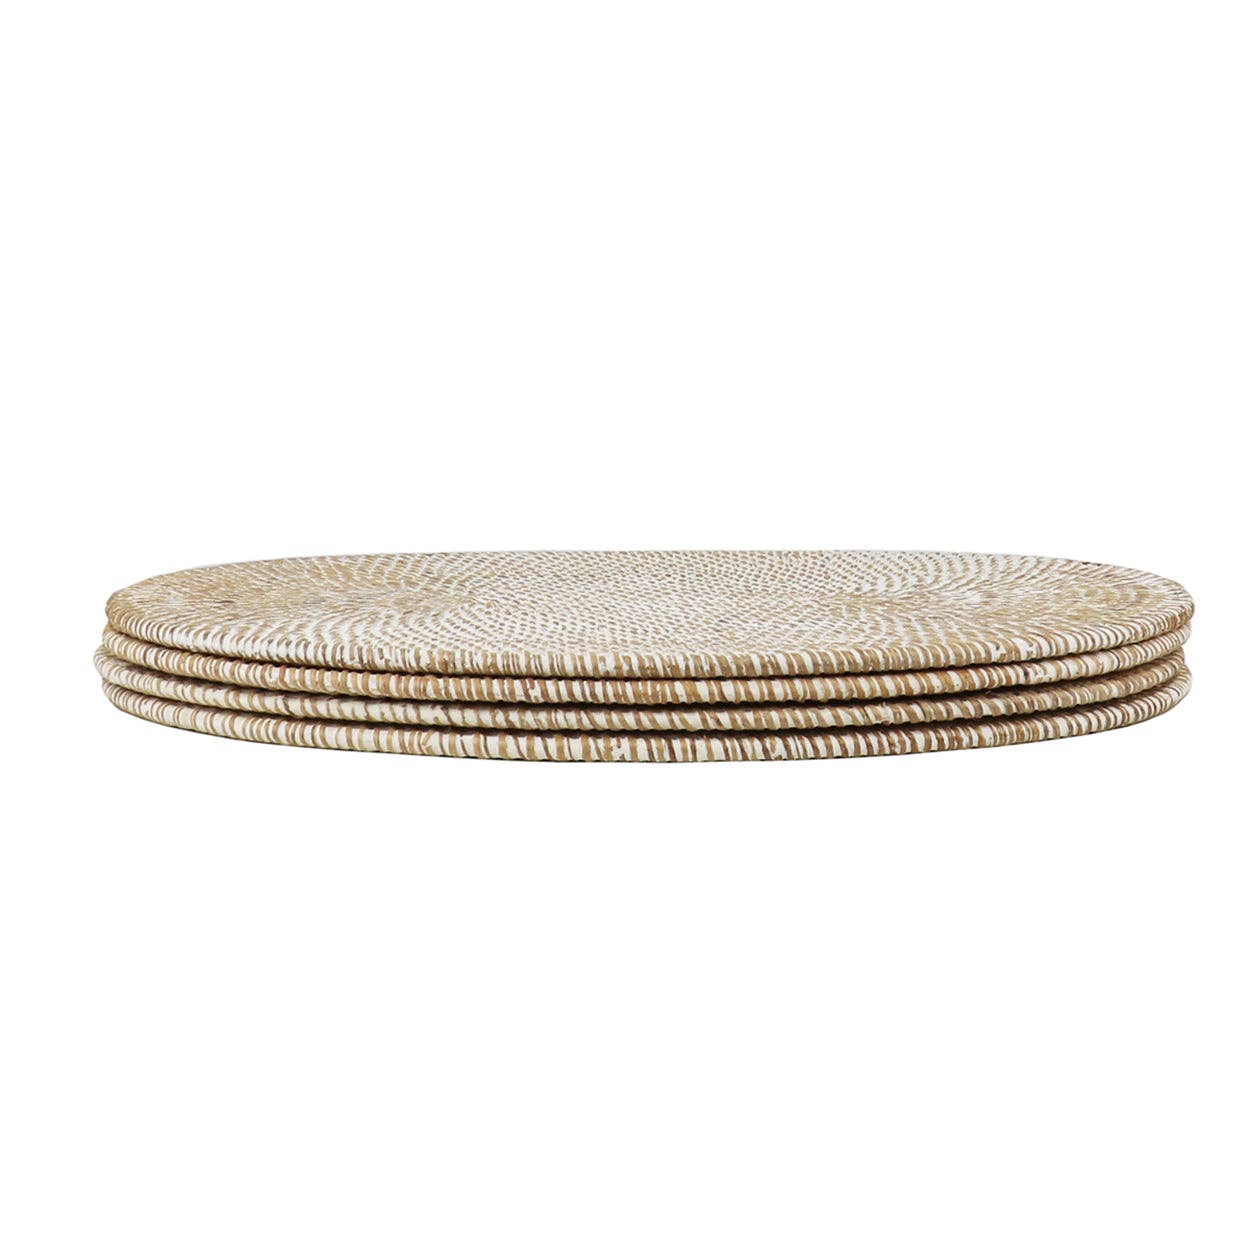 Bali Oval Placemat